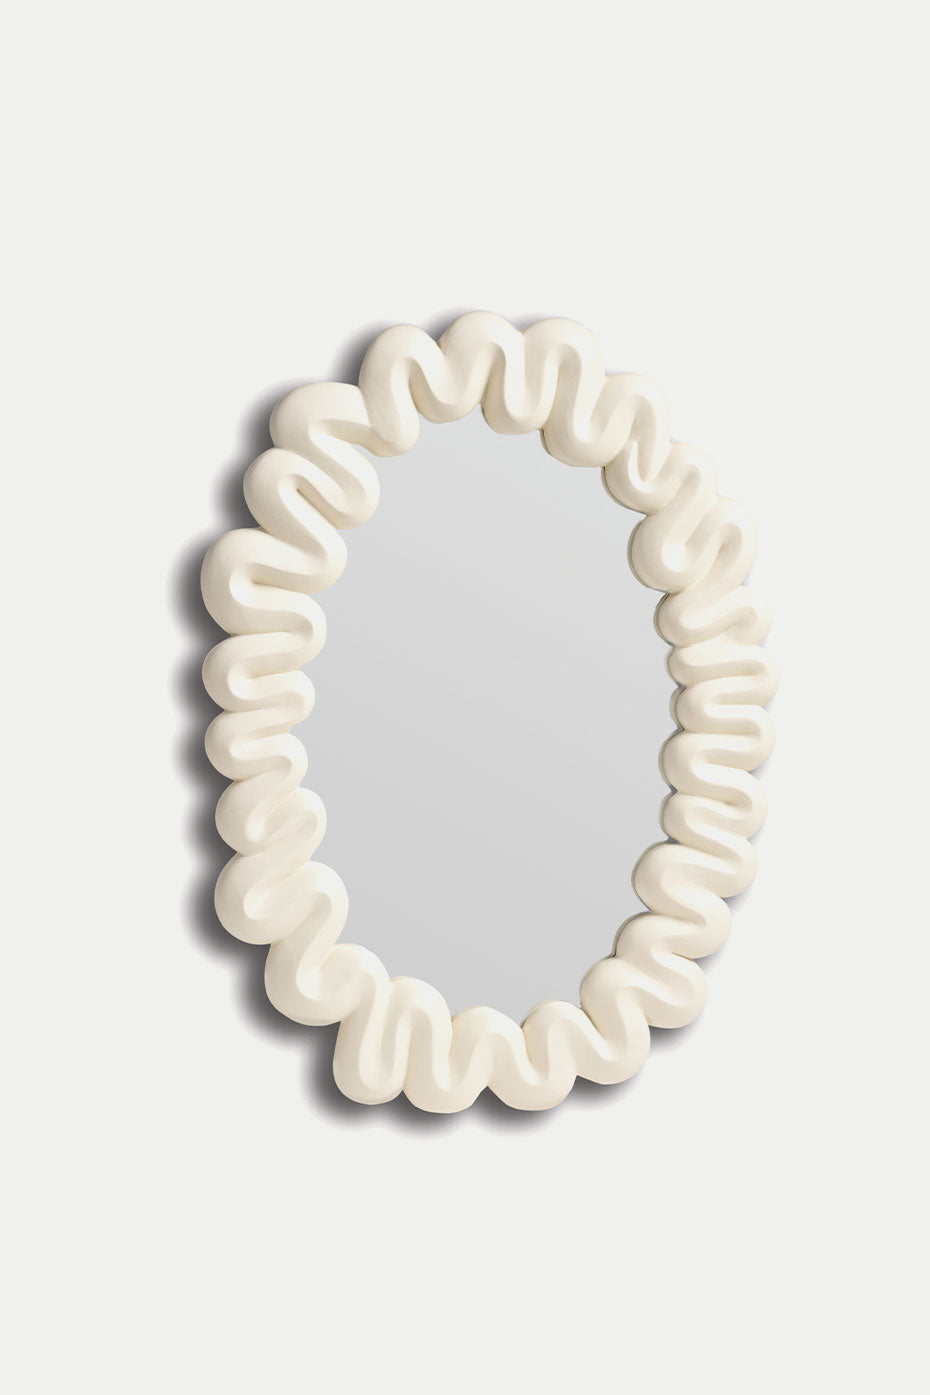 andklevering-white-dribble-mirror